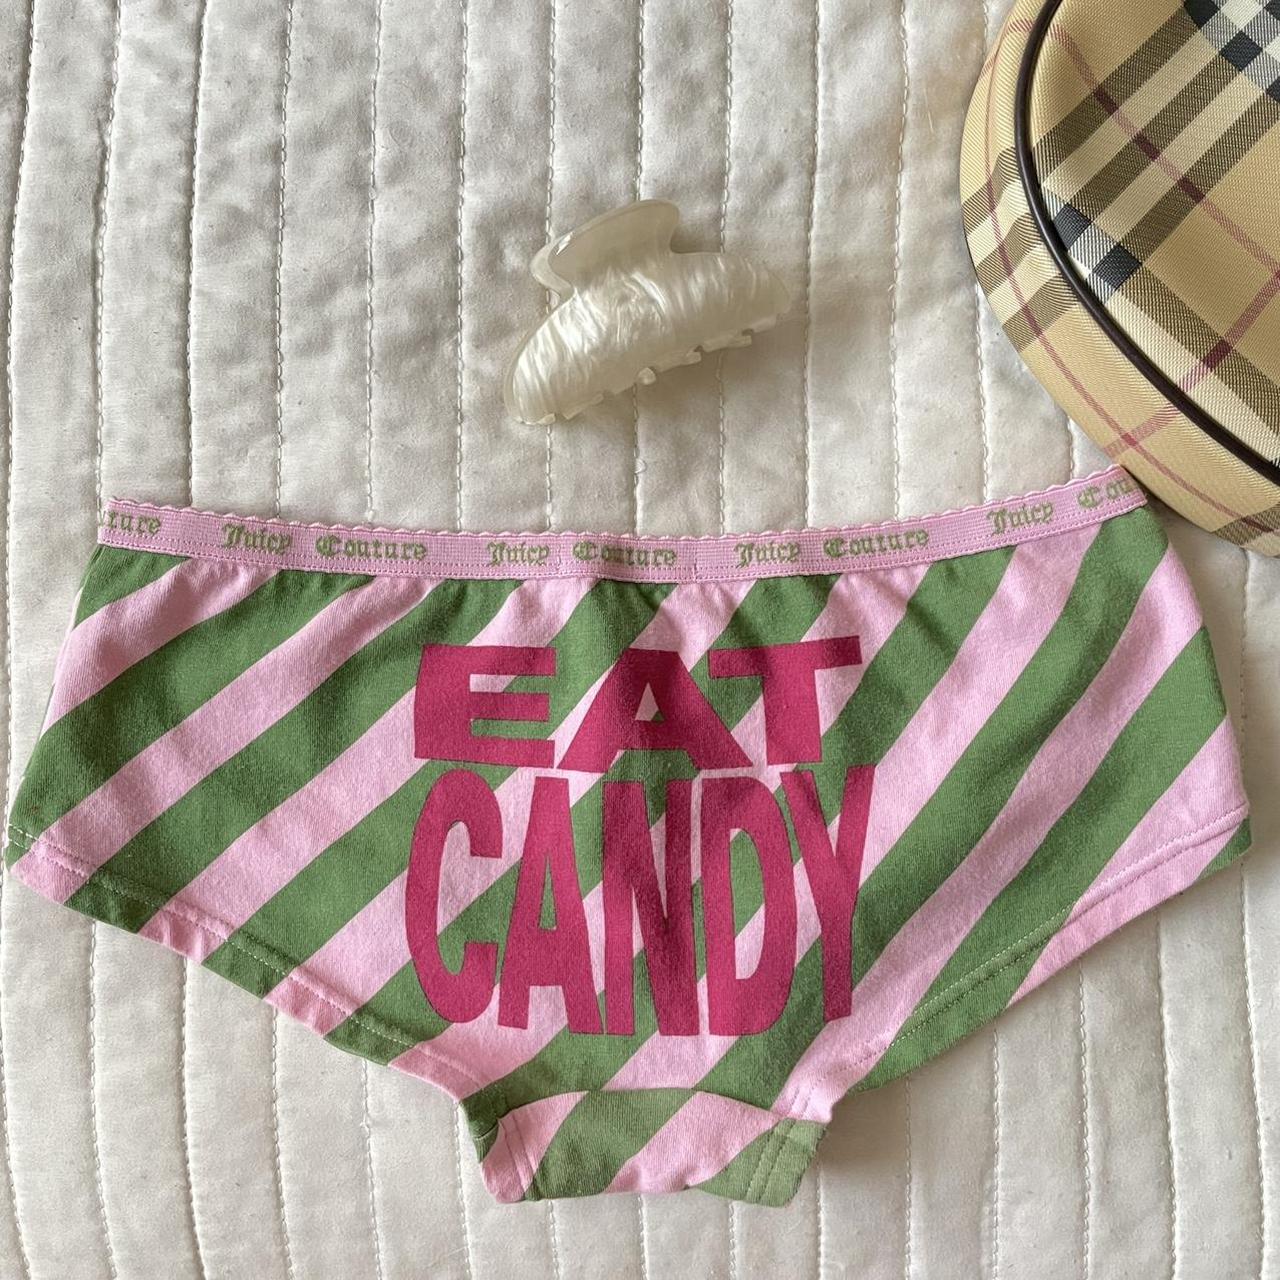 Juicy Couture cheeky low rise bottoms, size XS. - Depop